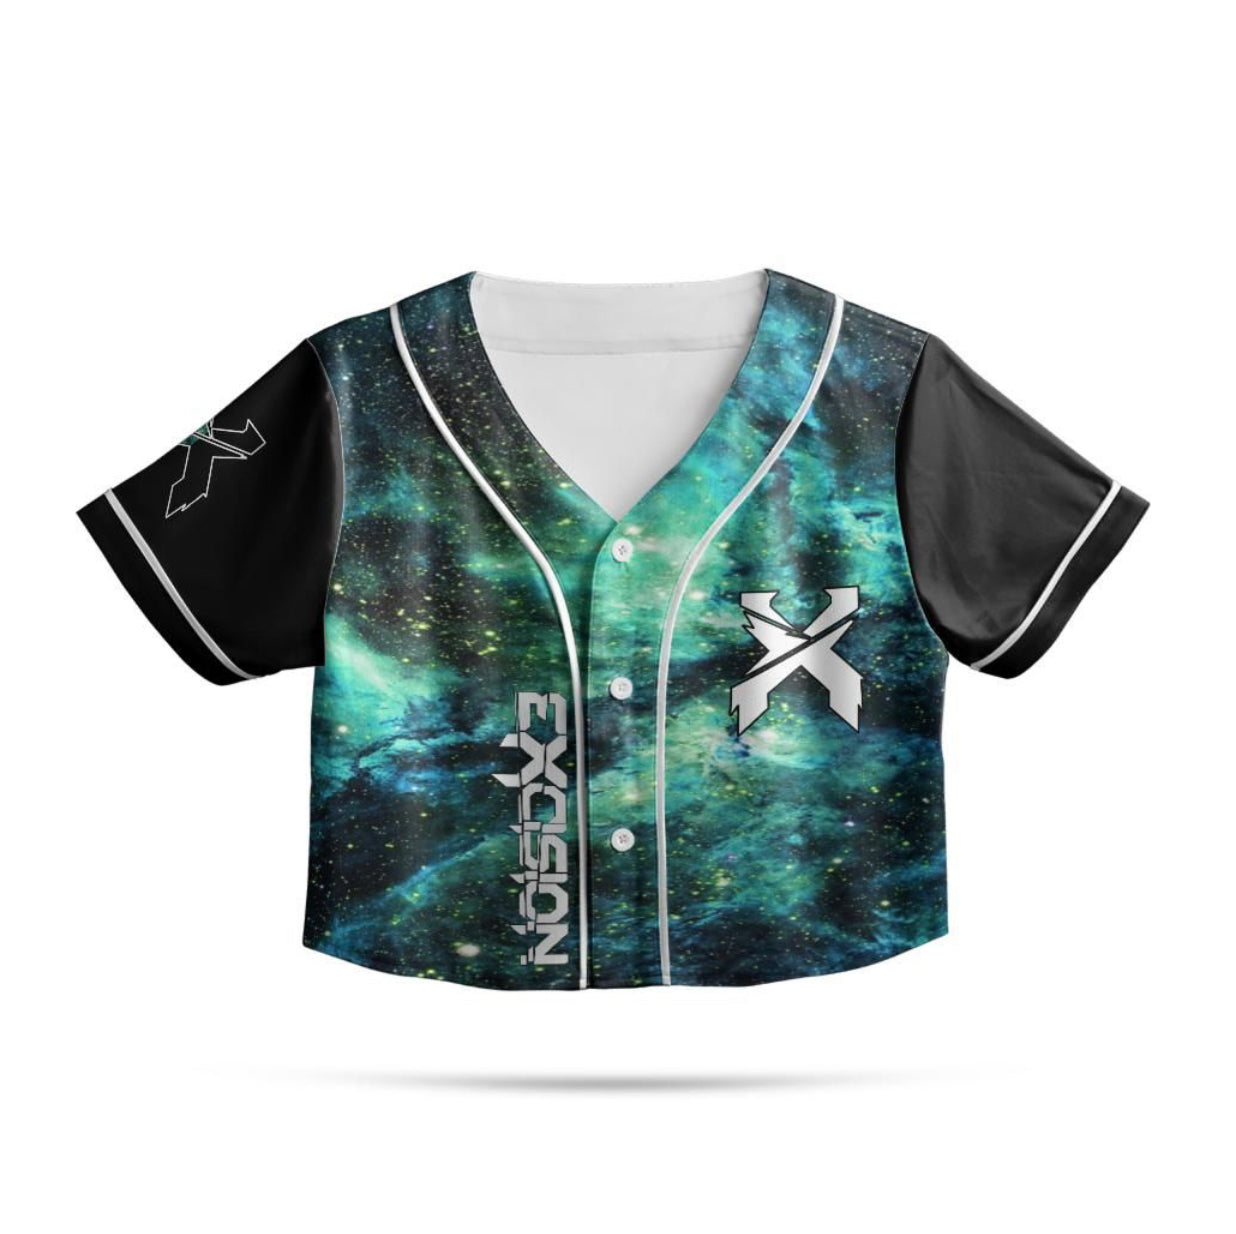 excision jersey for sale